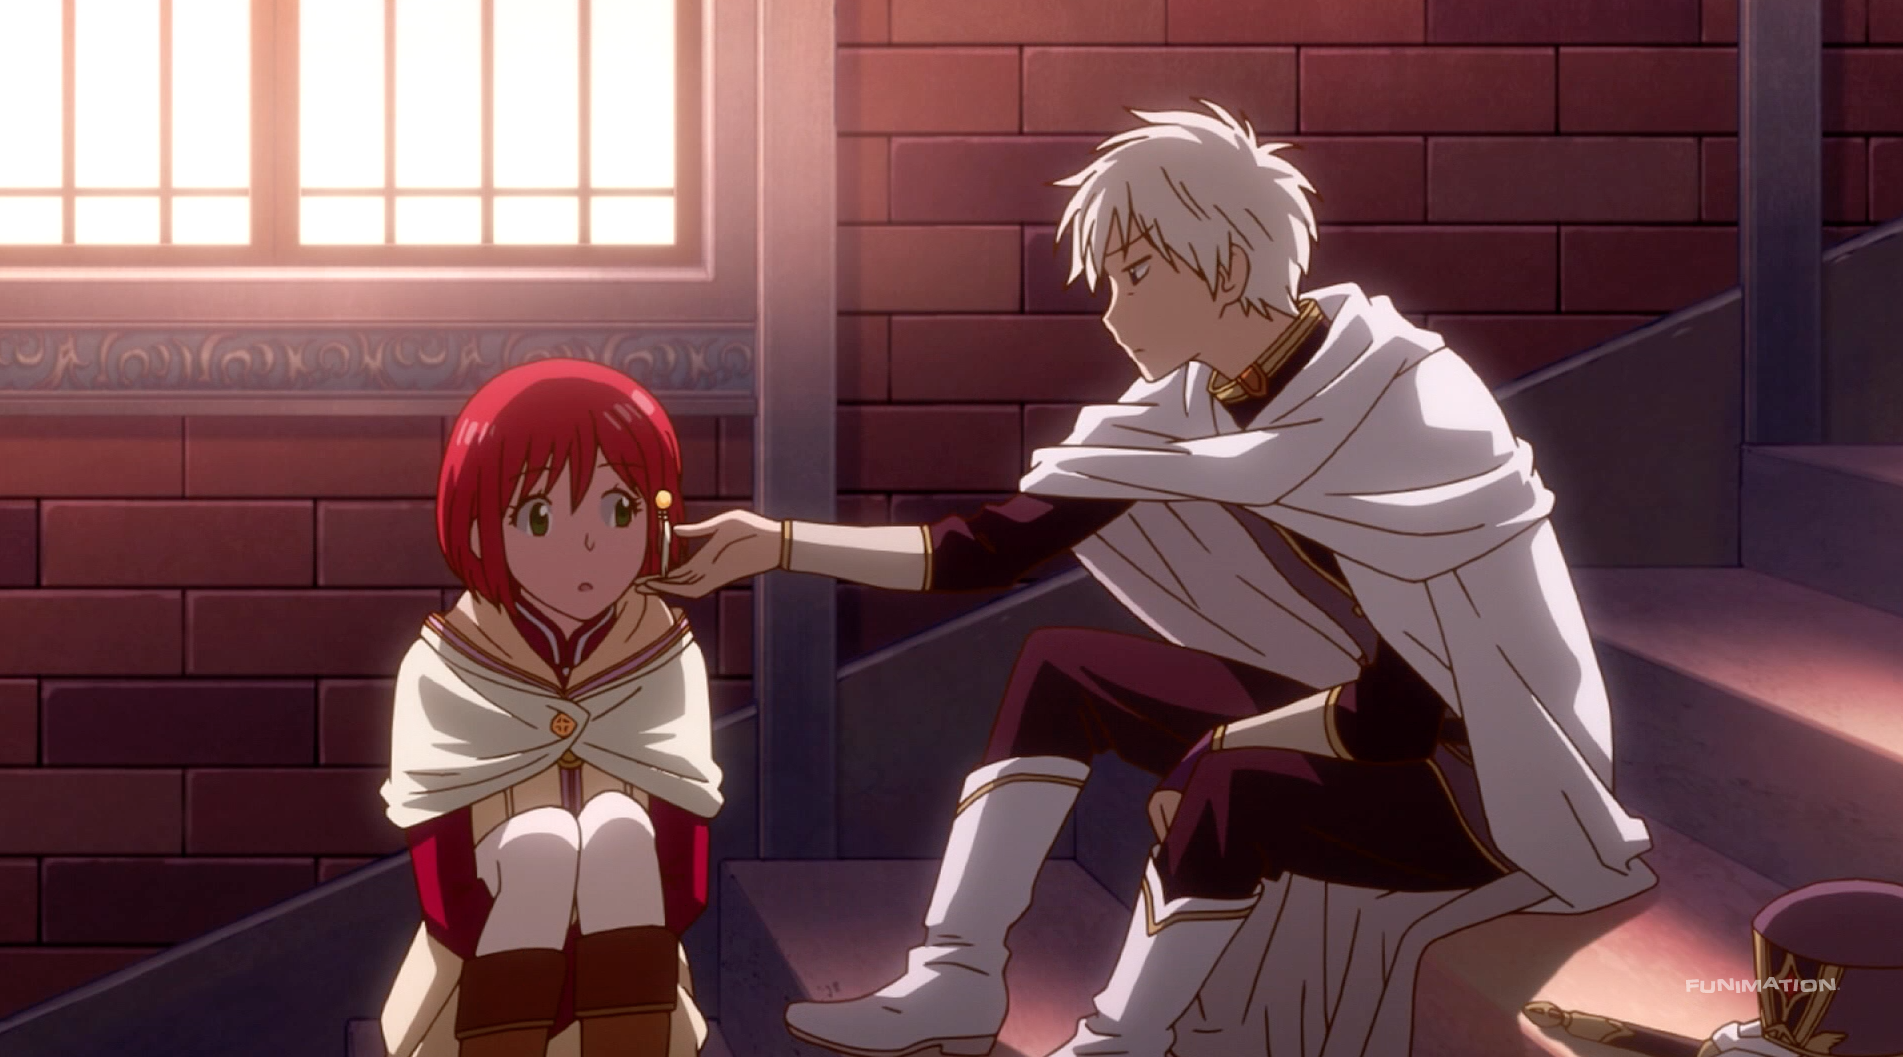 Seraph ovn Avl Anime Review: Snow White with the Red Hair Part 2 | Heart of Manga